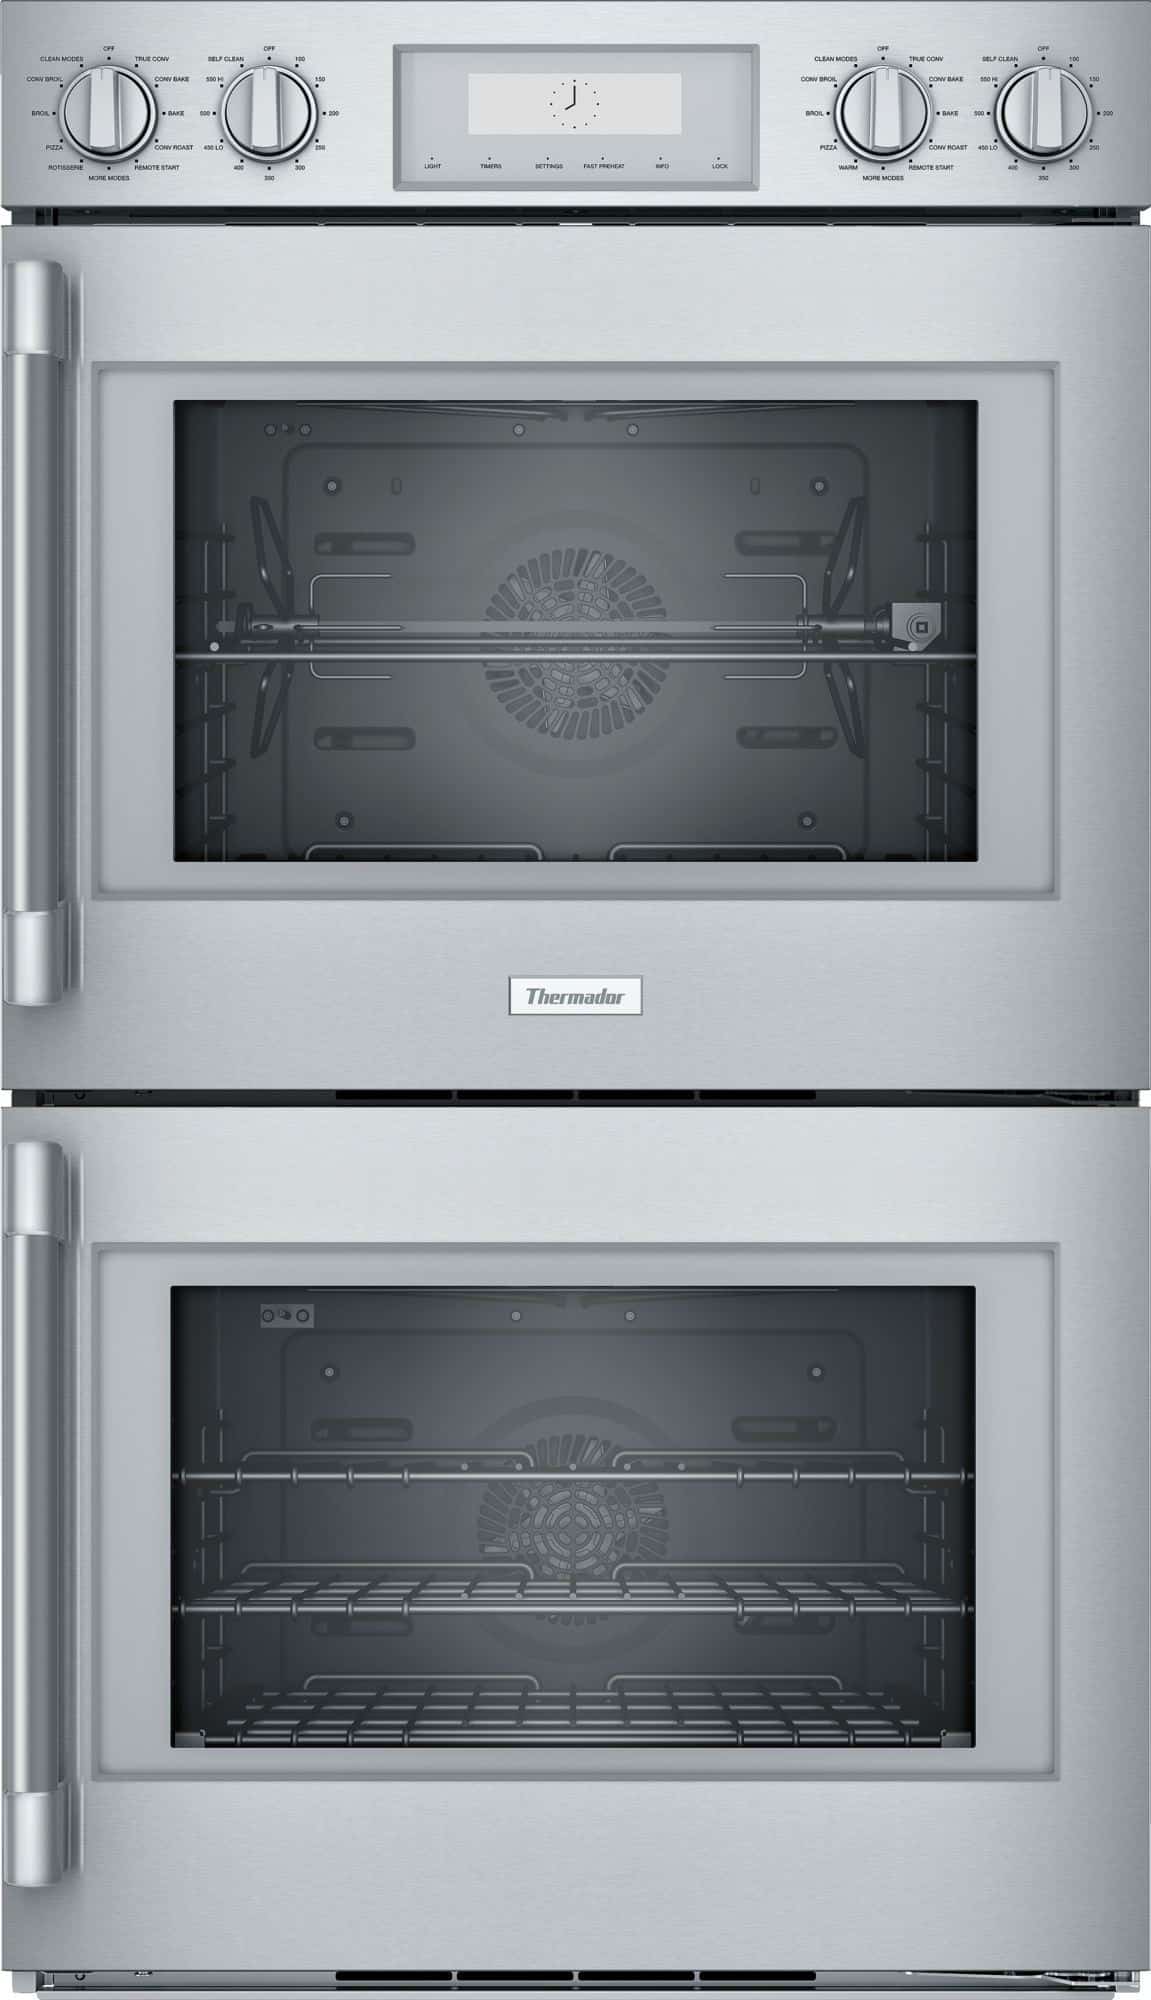 Bosch Vs Thermador Oven